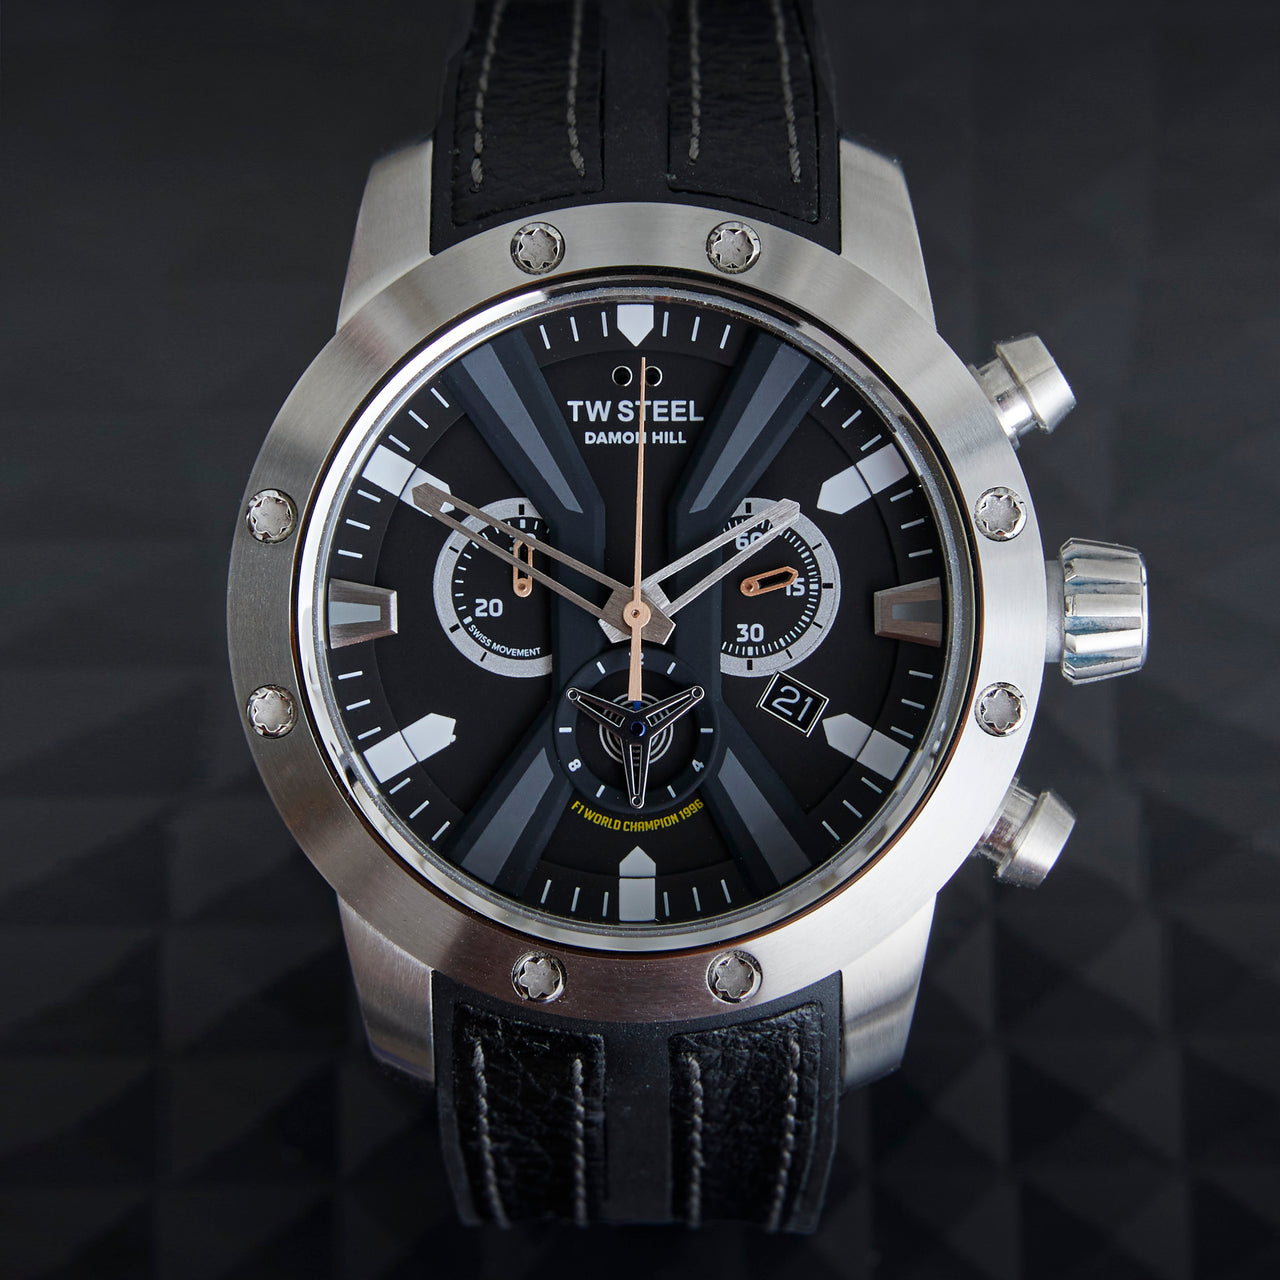 TW Steel Watch Grand Tech Chronograph Damon Hill Limited Edition GT15